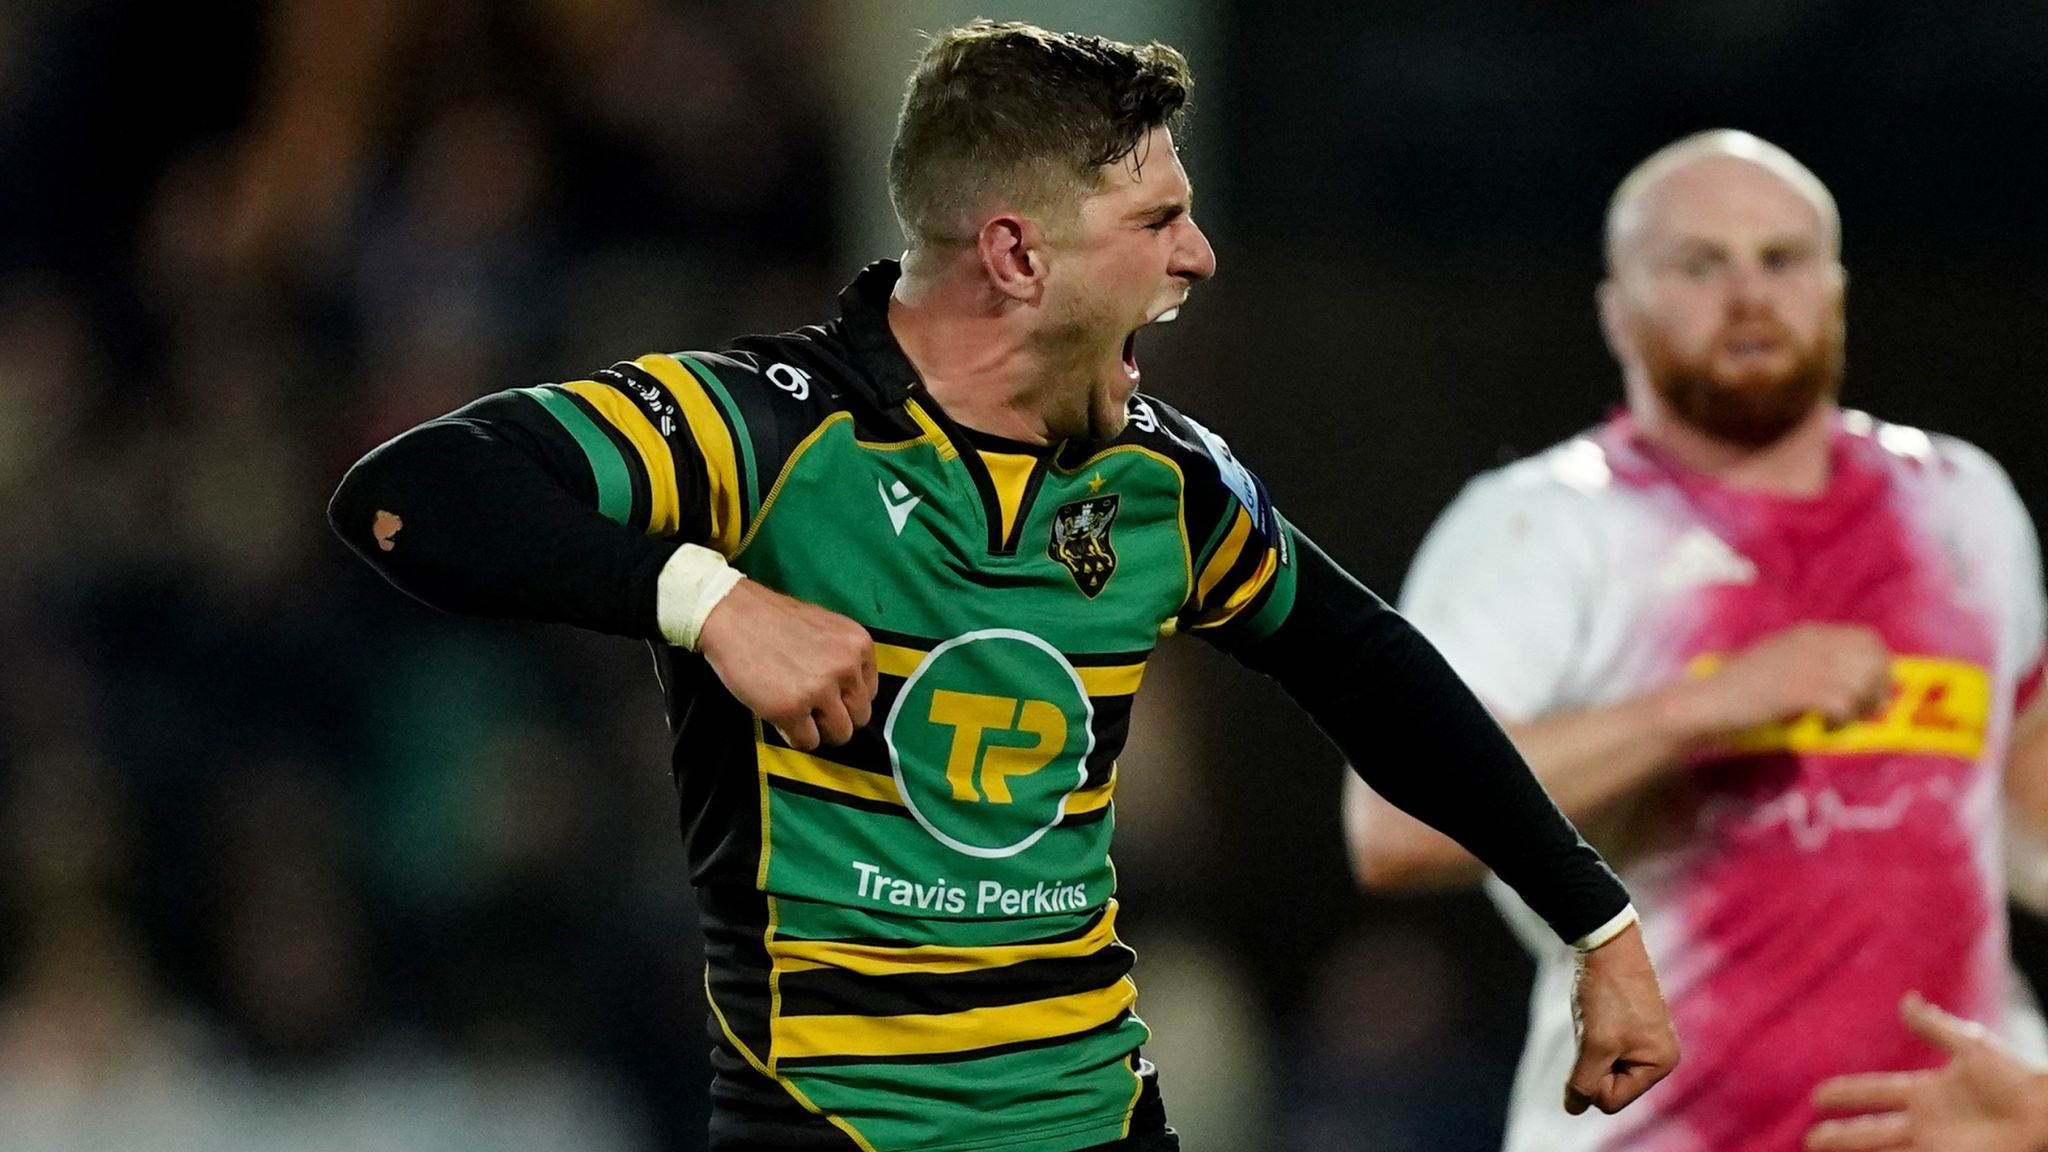 Gallagher Premiership Northampton Saints snatch win, Sale Sharks stay in play-off hunt Rugby Union News Sky Sports